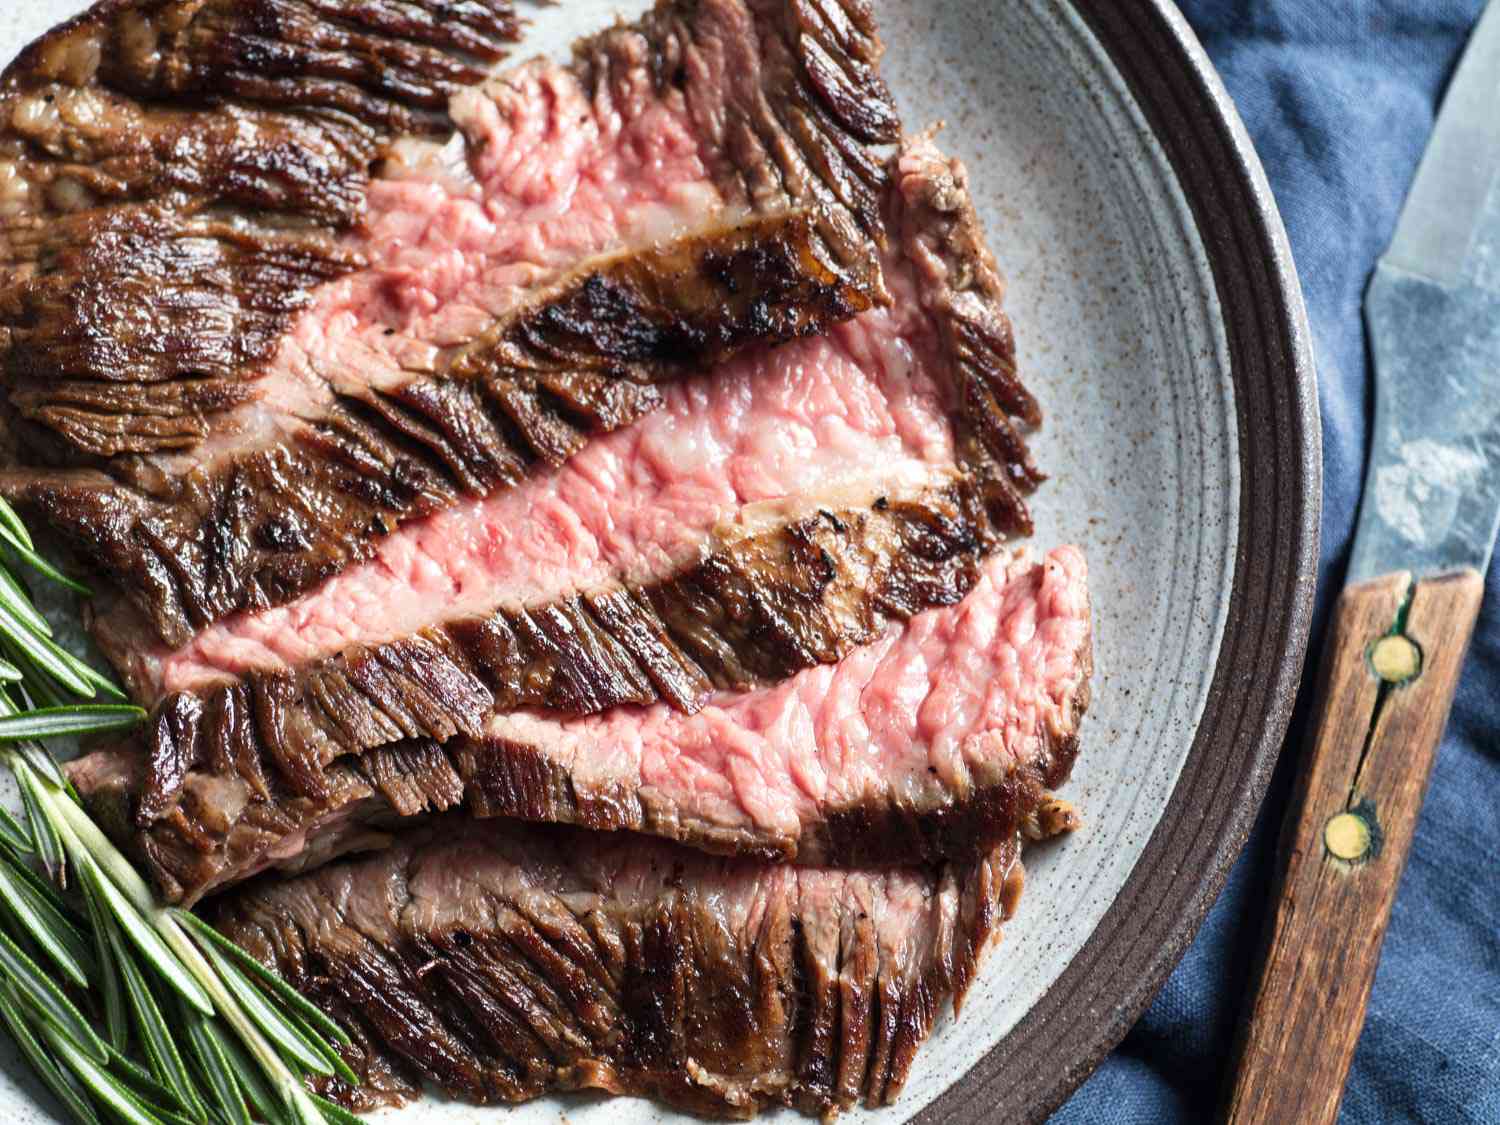 how-to-bake-a-large-london-broil-steak-in-the-oven-to-medium-well